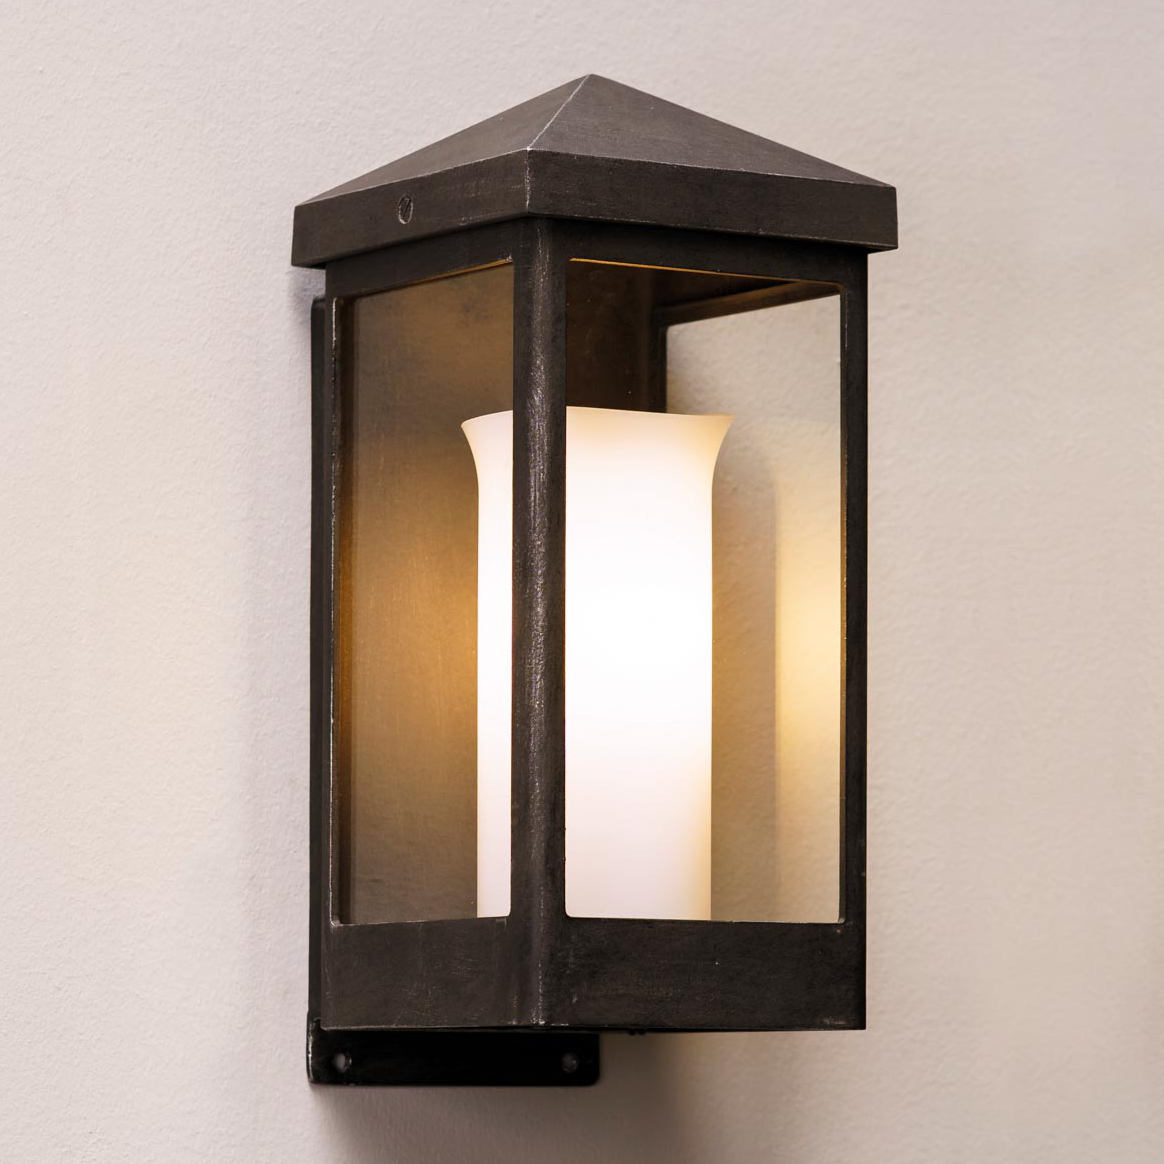 Box Wall Light with Pointed Roof and Candle Spout WL 3698